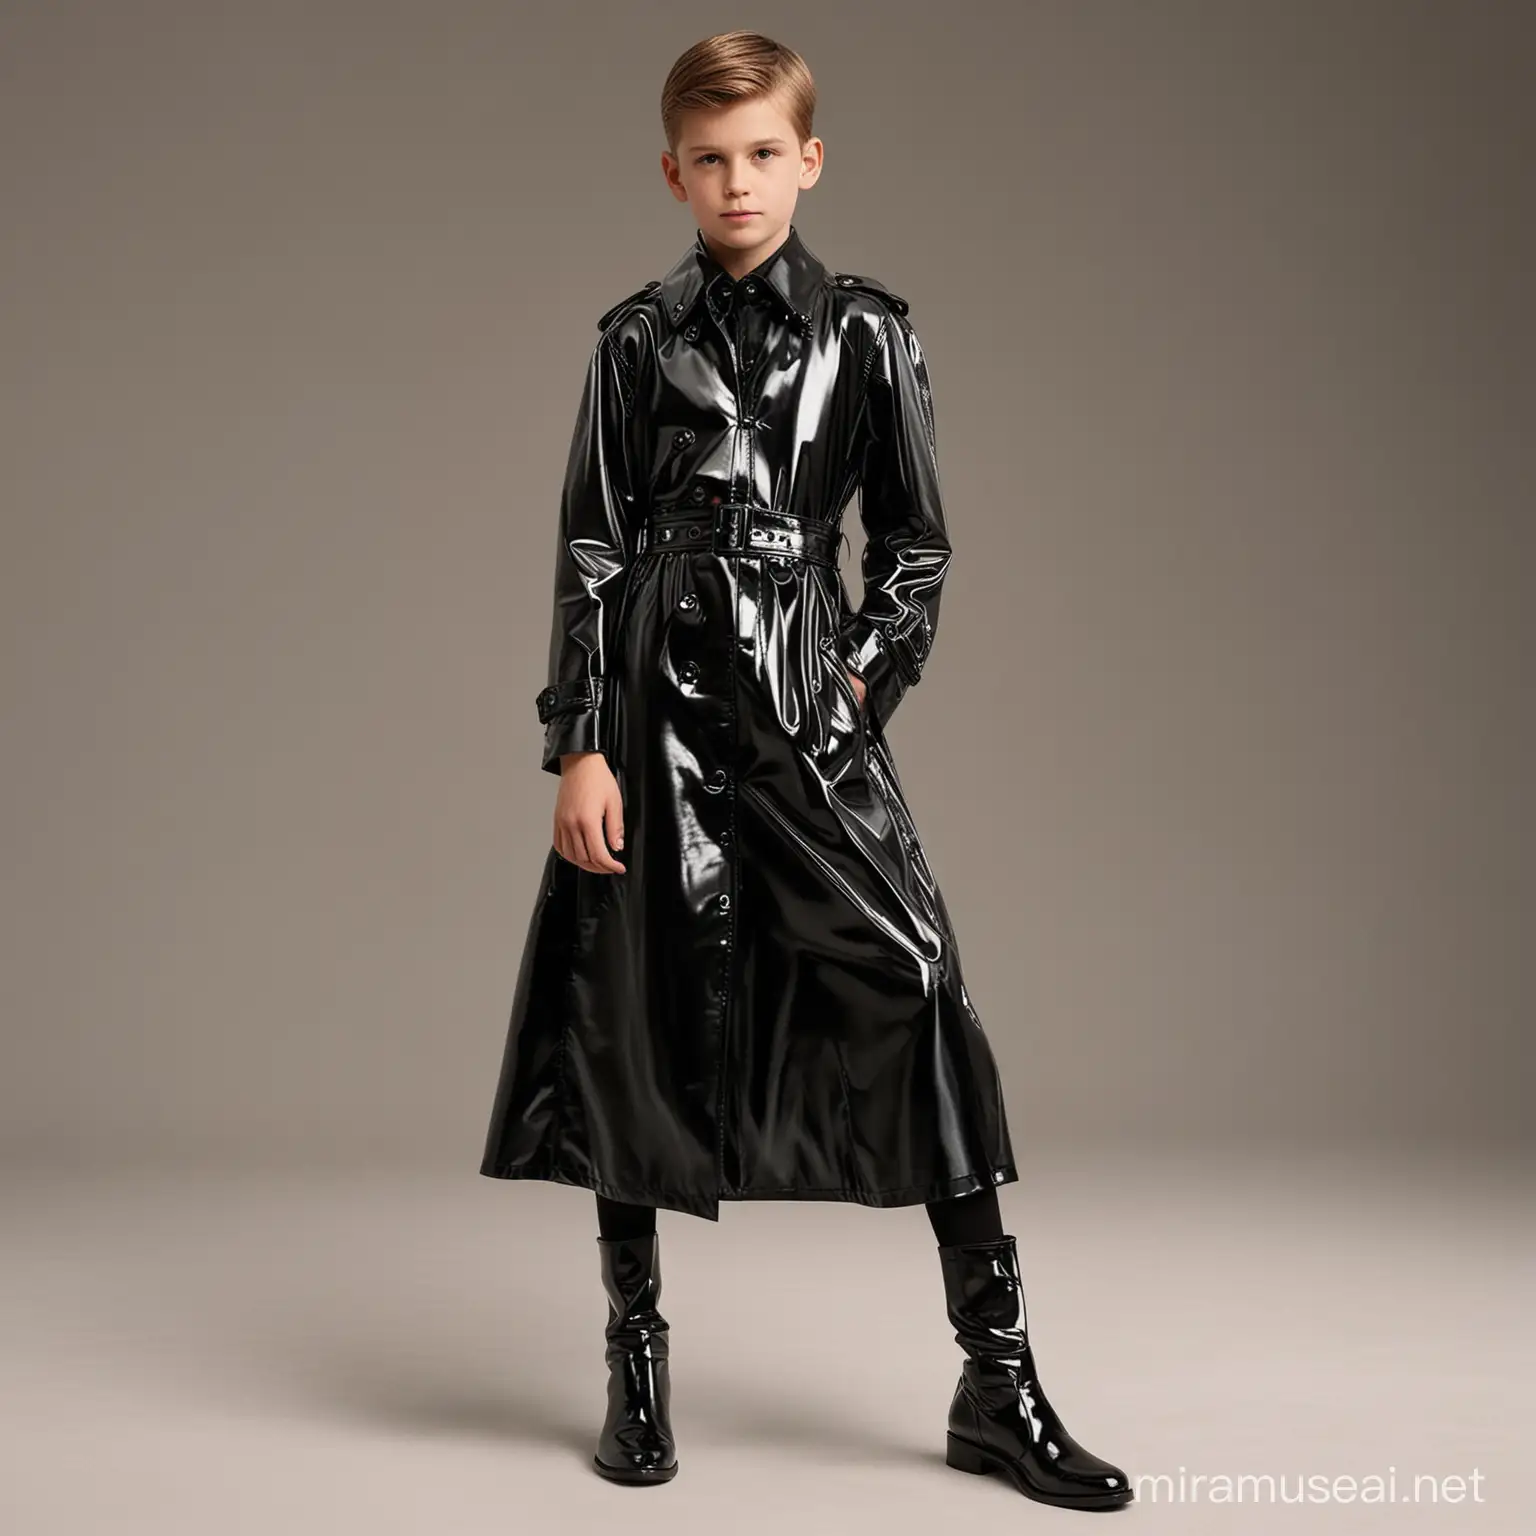 a young boy wearing a shiny pvc trenchcoat maxi length black meant for girls but he wears it anyway